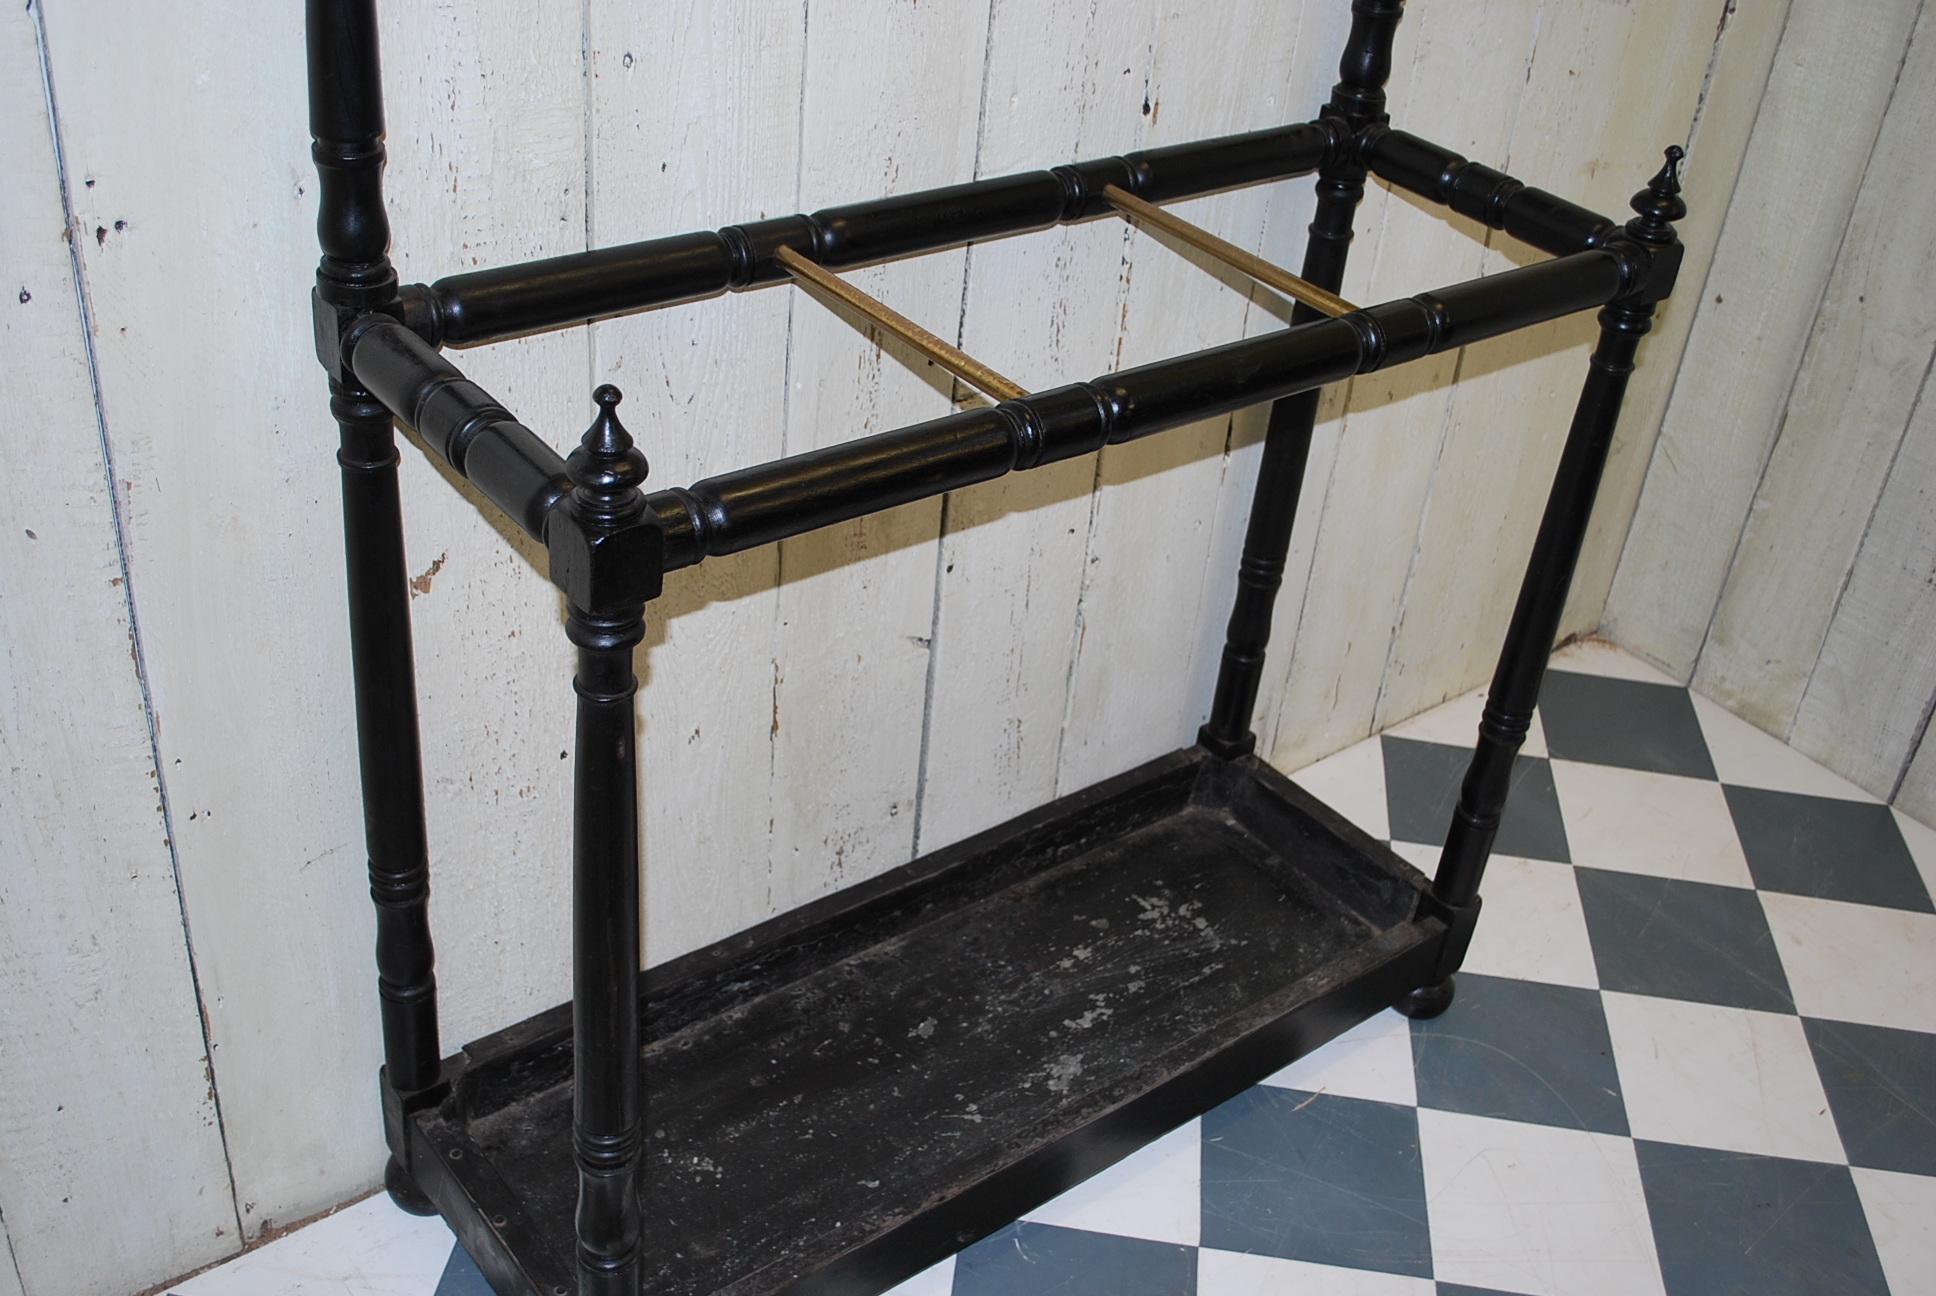 Good quality Regency ebonized hall stand with a tray at bellow with dividers for sticks and hat hooks above.